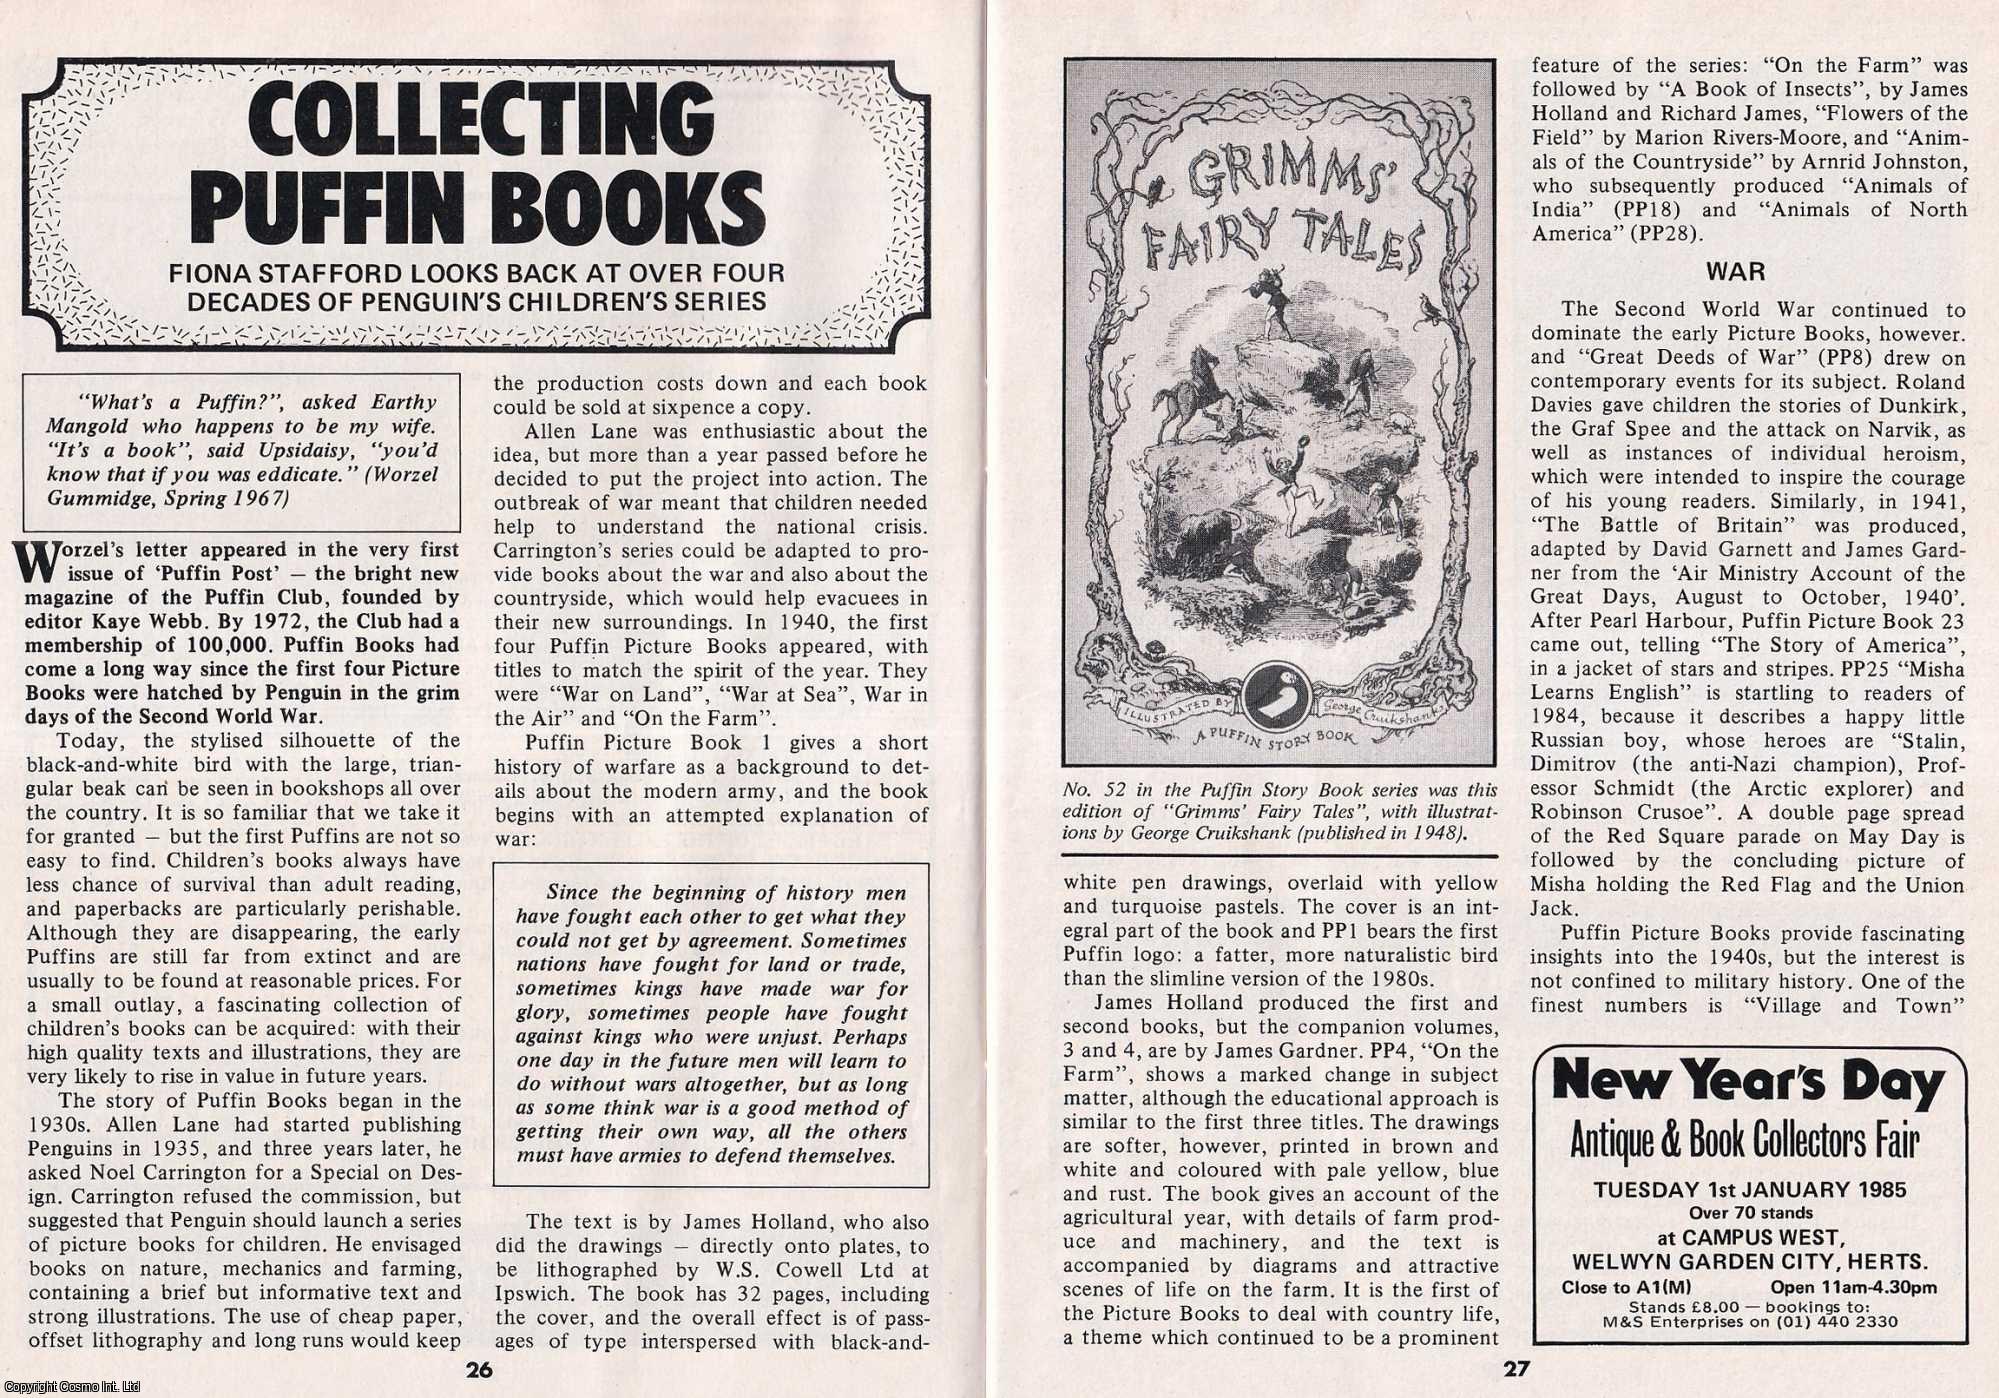 Fiona Stafford - Collecting Puffin Books. This is an original article separated from an issue of The Book & Magazine Collector publication, 1985.